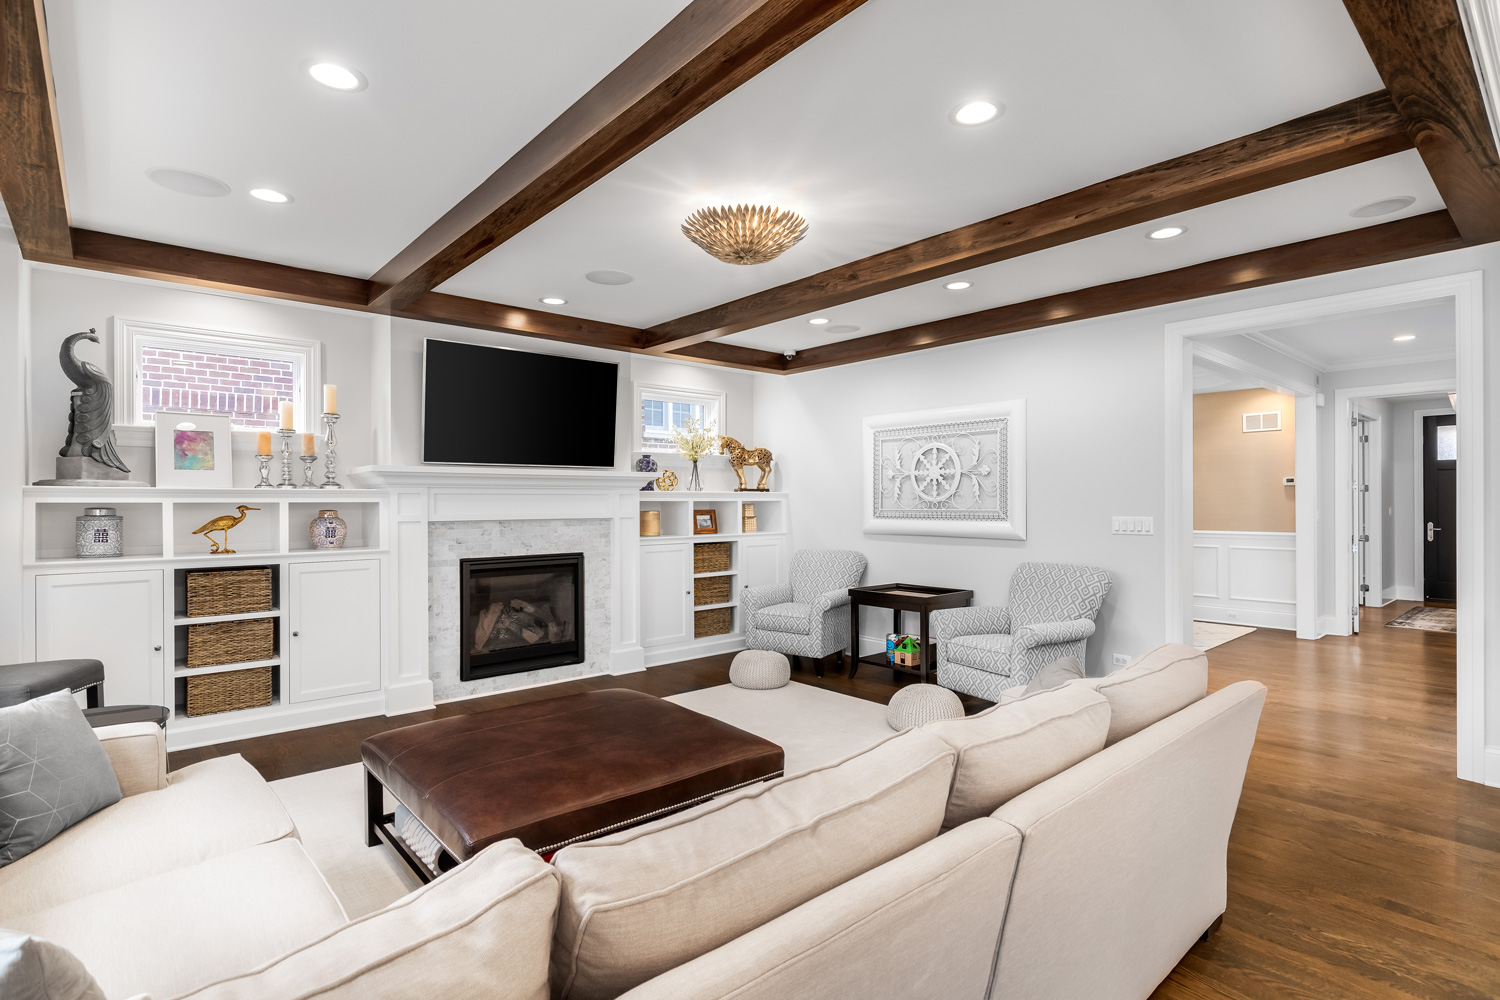  A luxury, modern farmhouse living room with wood beams on the ceiling, a tiled fireplace surrounded by built in shelves and furniture on the hardwood flooring.